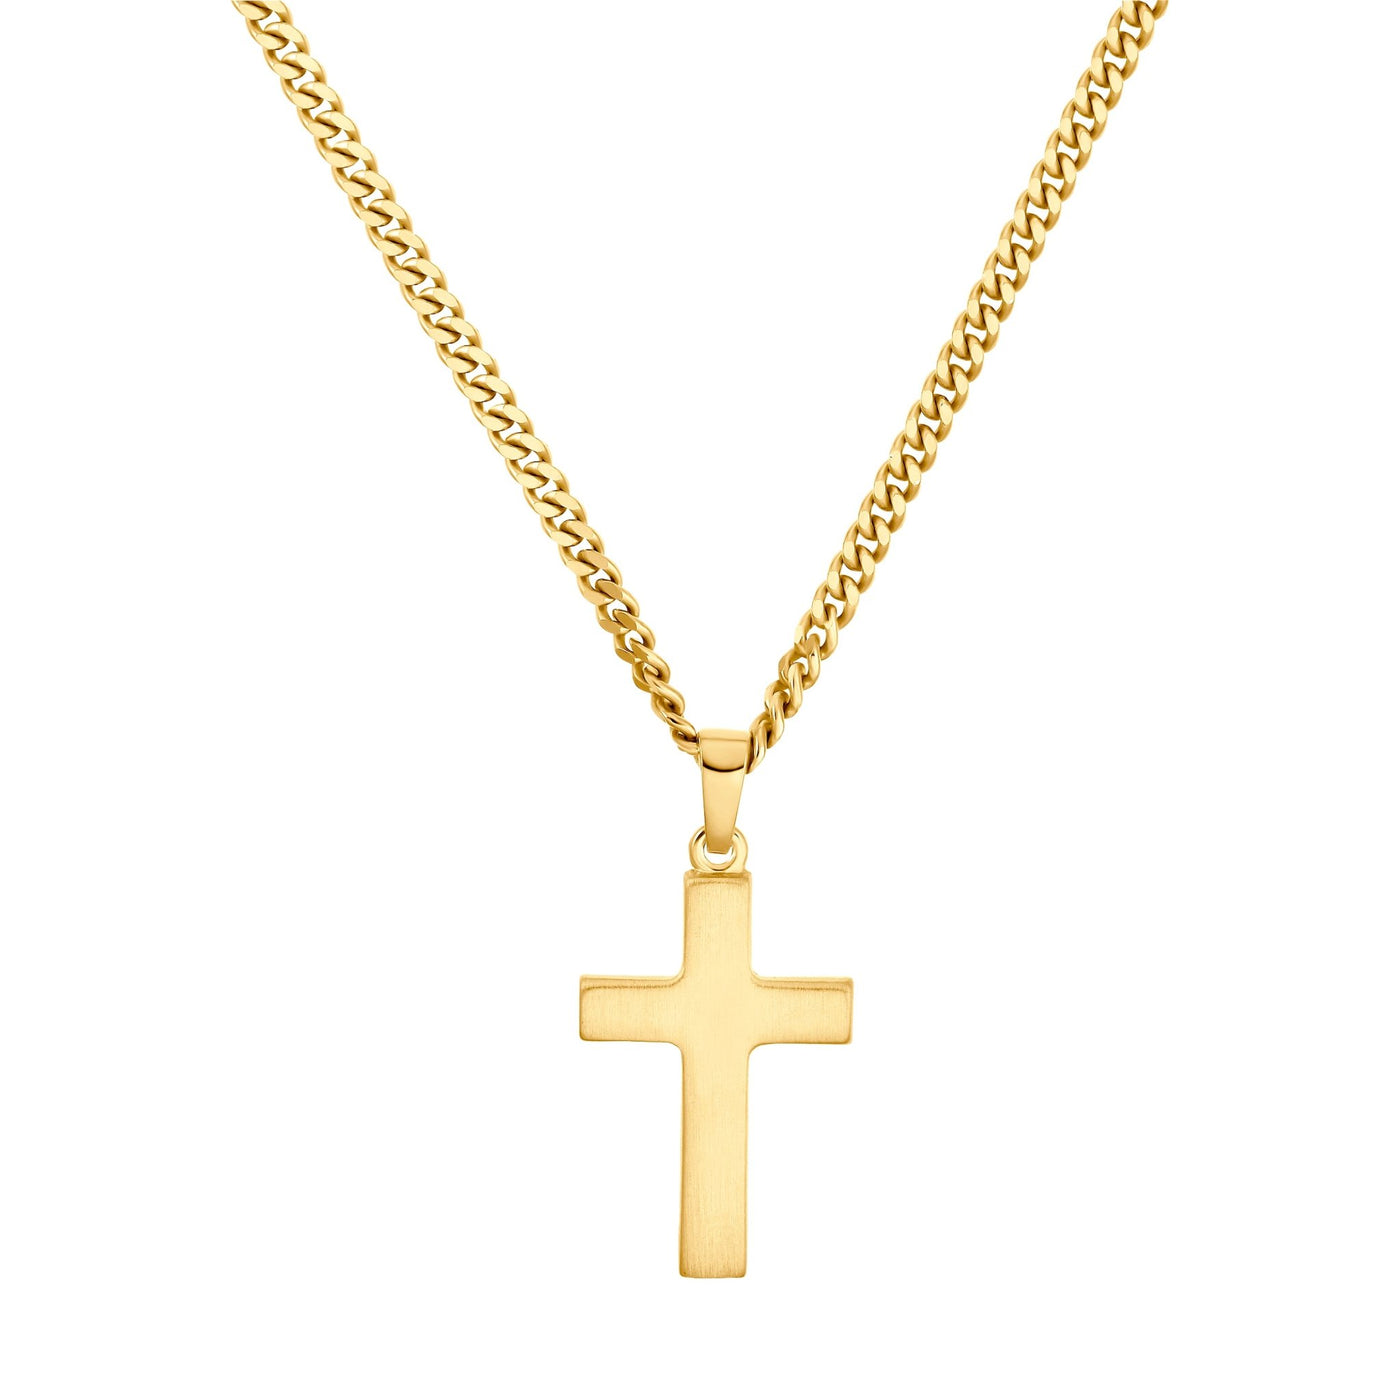 CROSS NECKLACE FROSTED 925 SILVER 18 KARAT GOLD PLATED - IDENTIM®